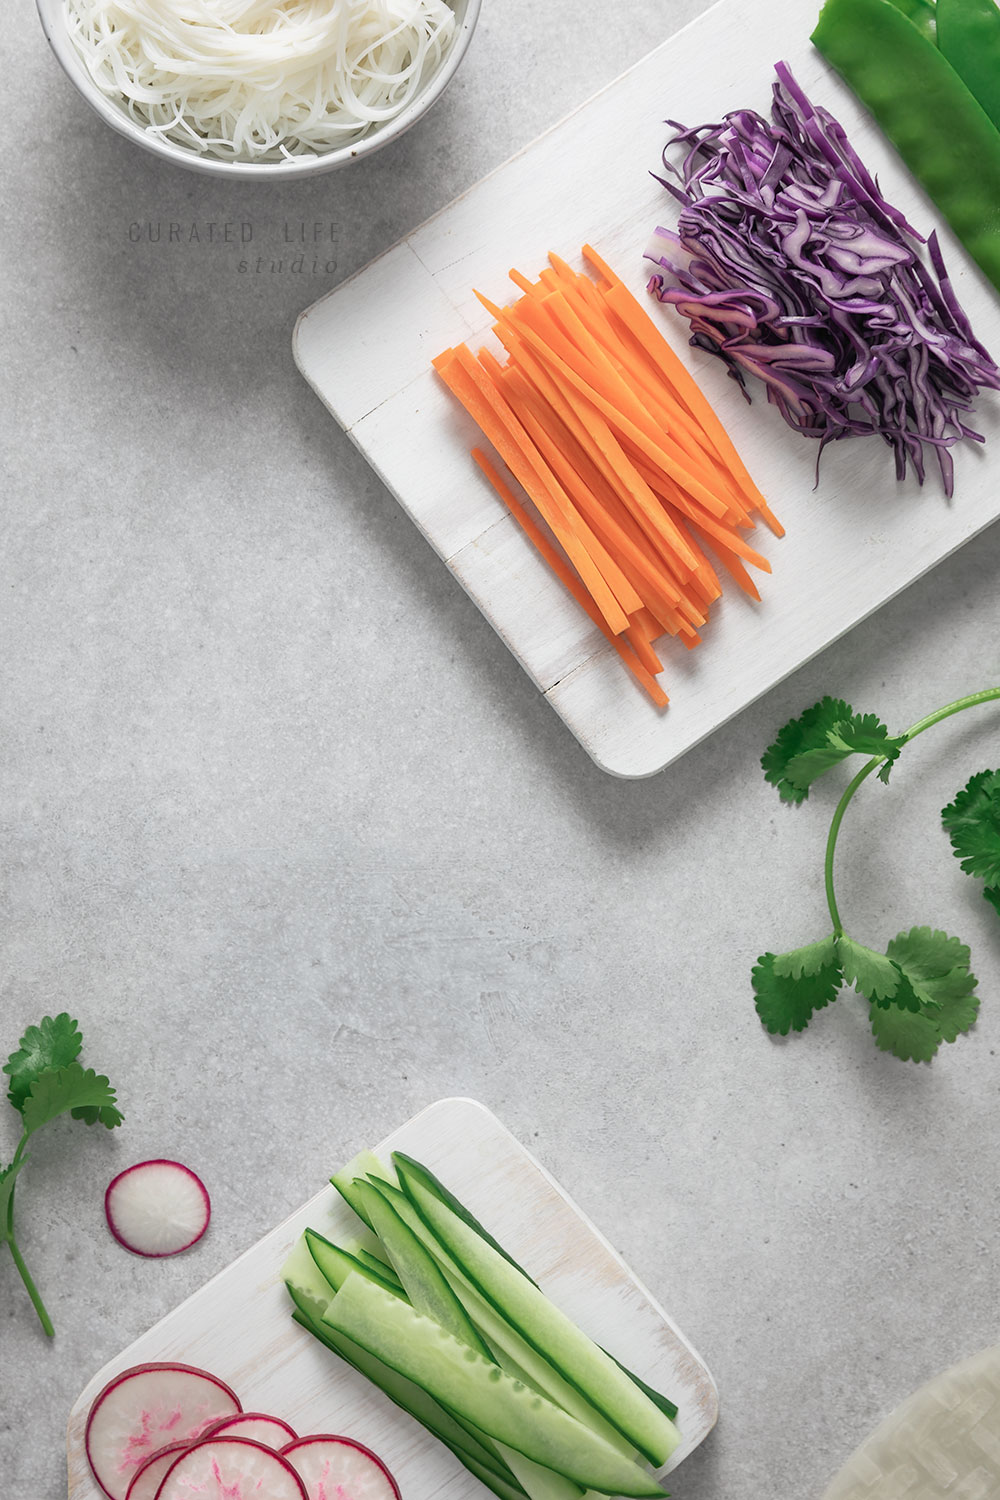 Birds eye view of two white chopping boards filled with recently chopped carrot sticks, cabbage, cucumber slices and radishes. 

#Vietnamese #Healthy #Peanut #Dipping #Sauce #Vegetarian #Vegan #Gluten-free #Tofu #Recipe #Rice #Paper #Spring #Rolls #Fresh